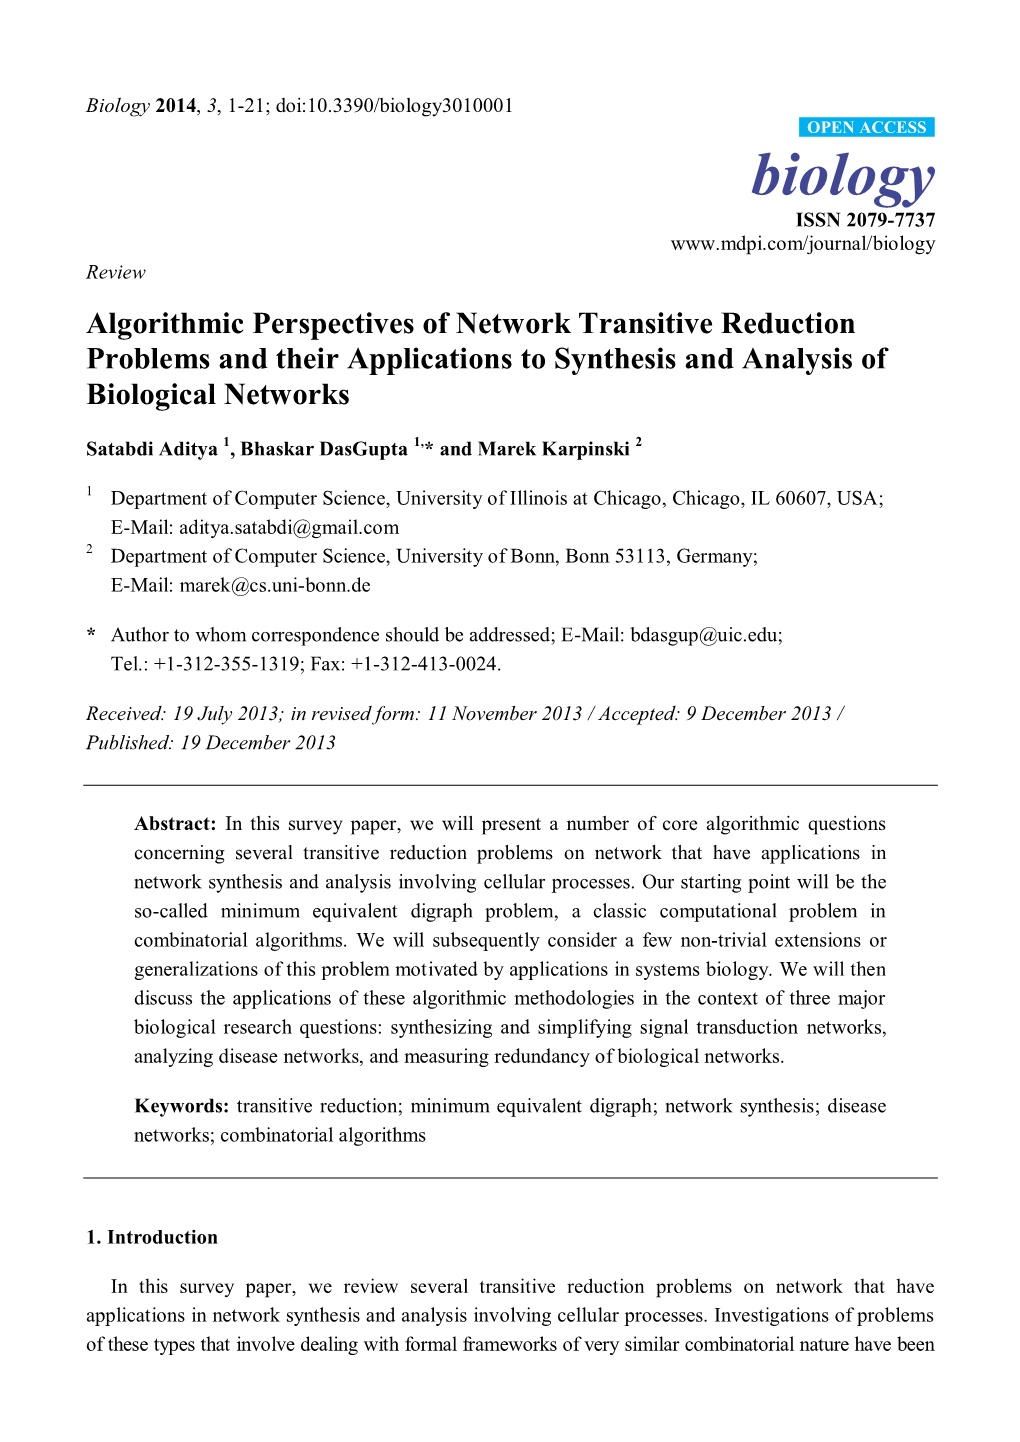 Algorithmic Perspectives of Network Transitive Reduction Problems and Their Applications to Synthesis and Analysis of Biological Networks